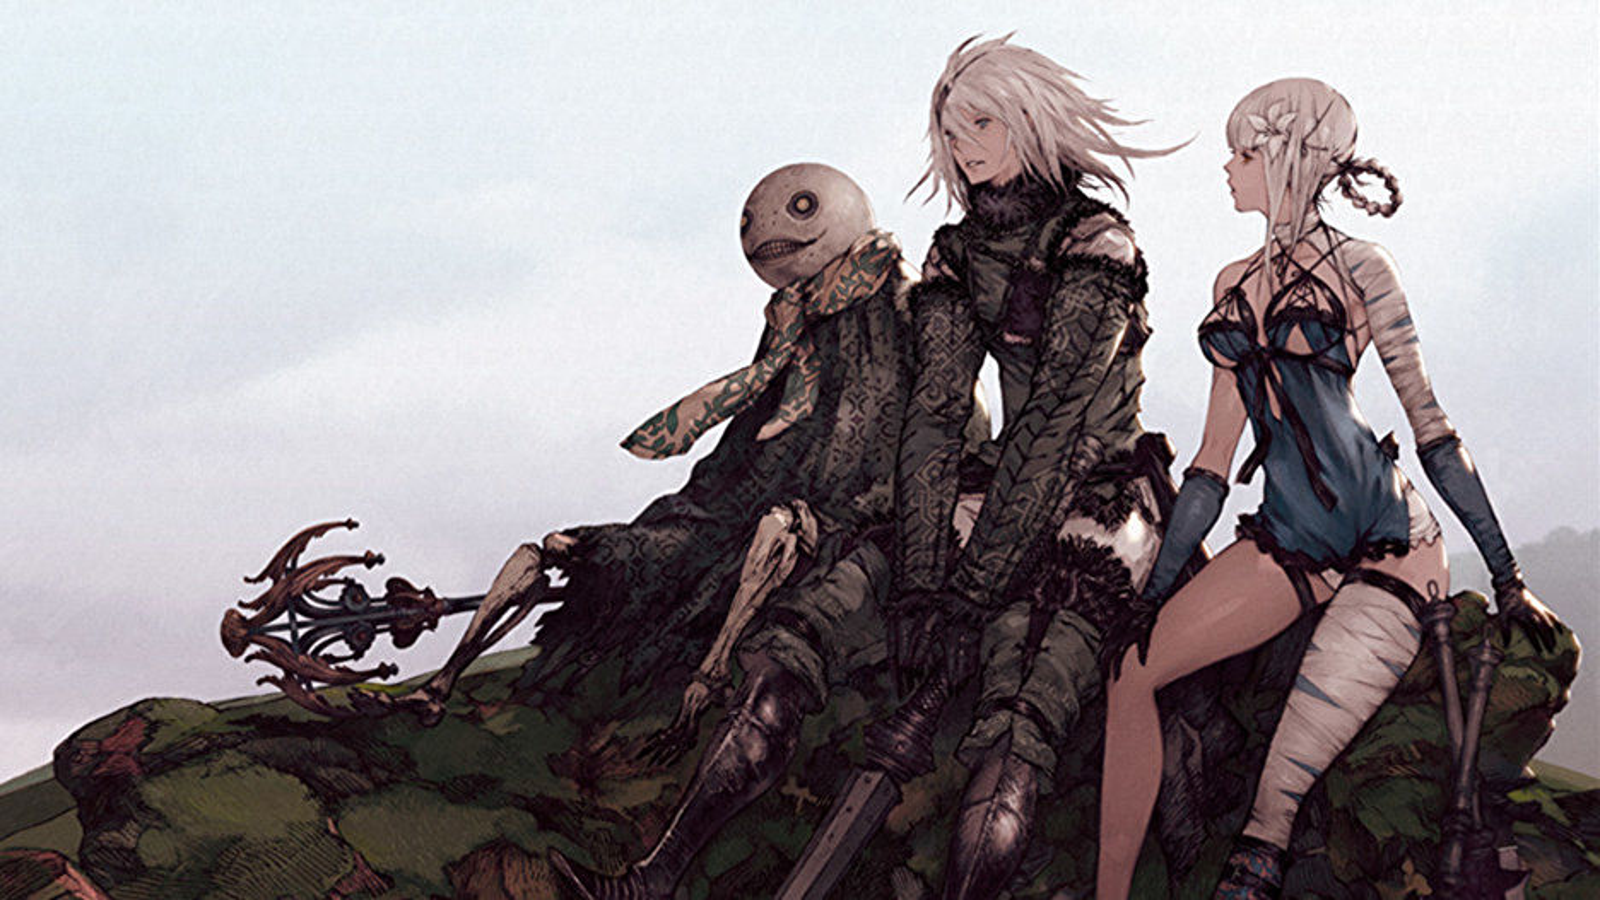 Nier Replicant Remake Launches Next April On PS4, Xbox One, And PC -  GameSpot